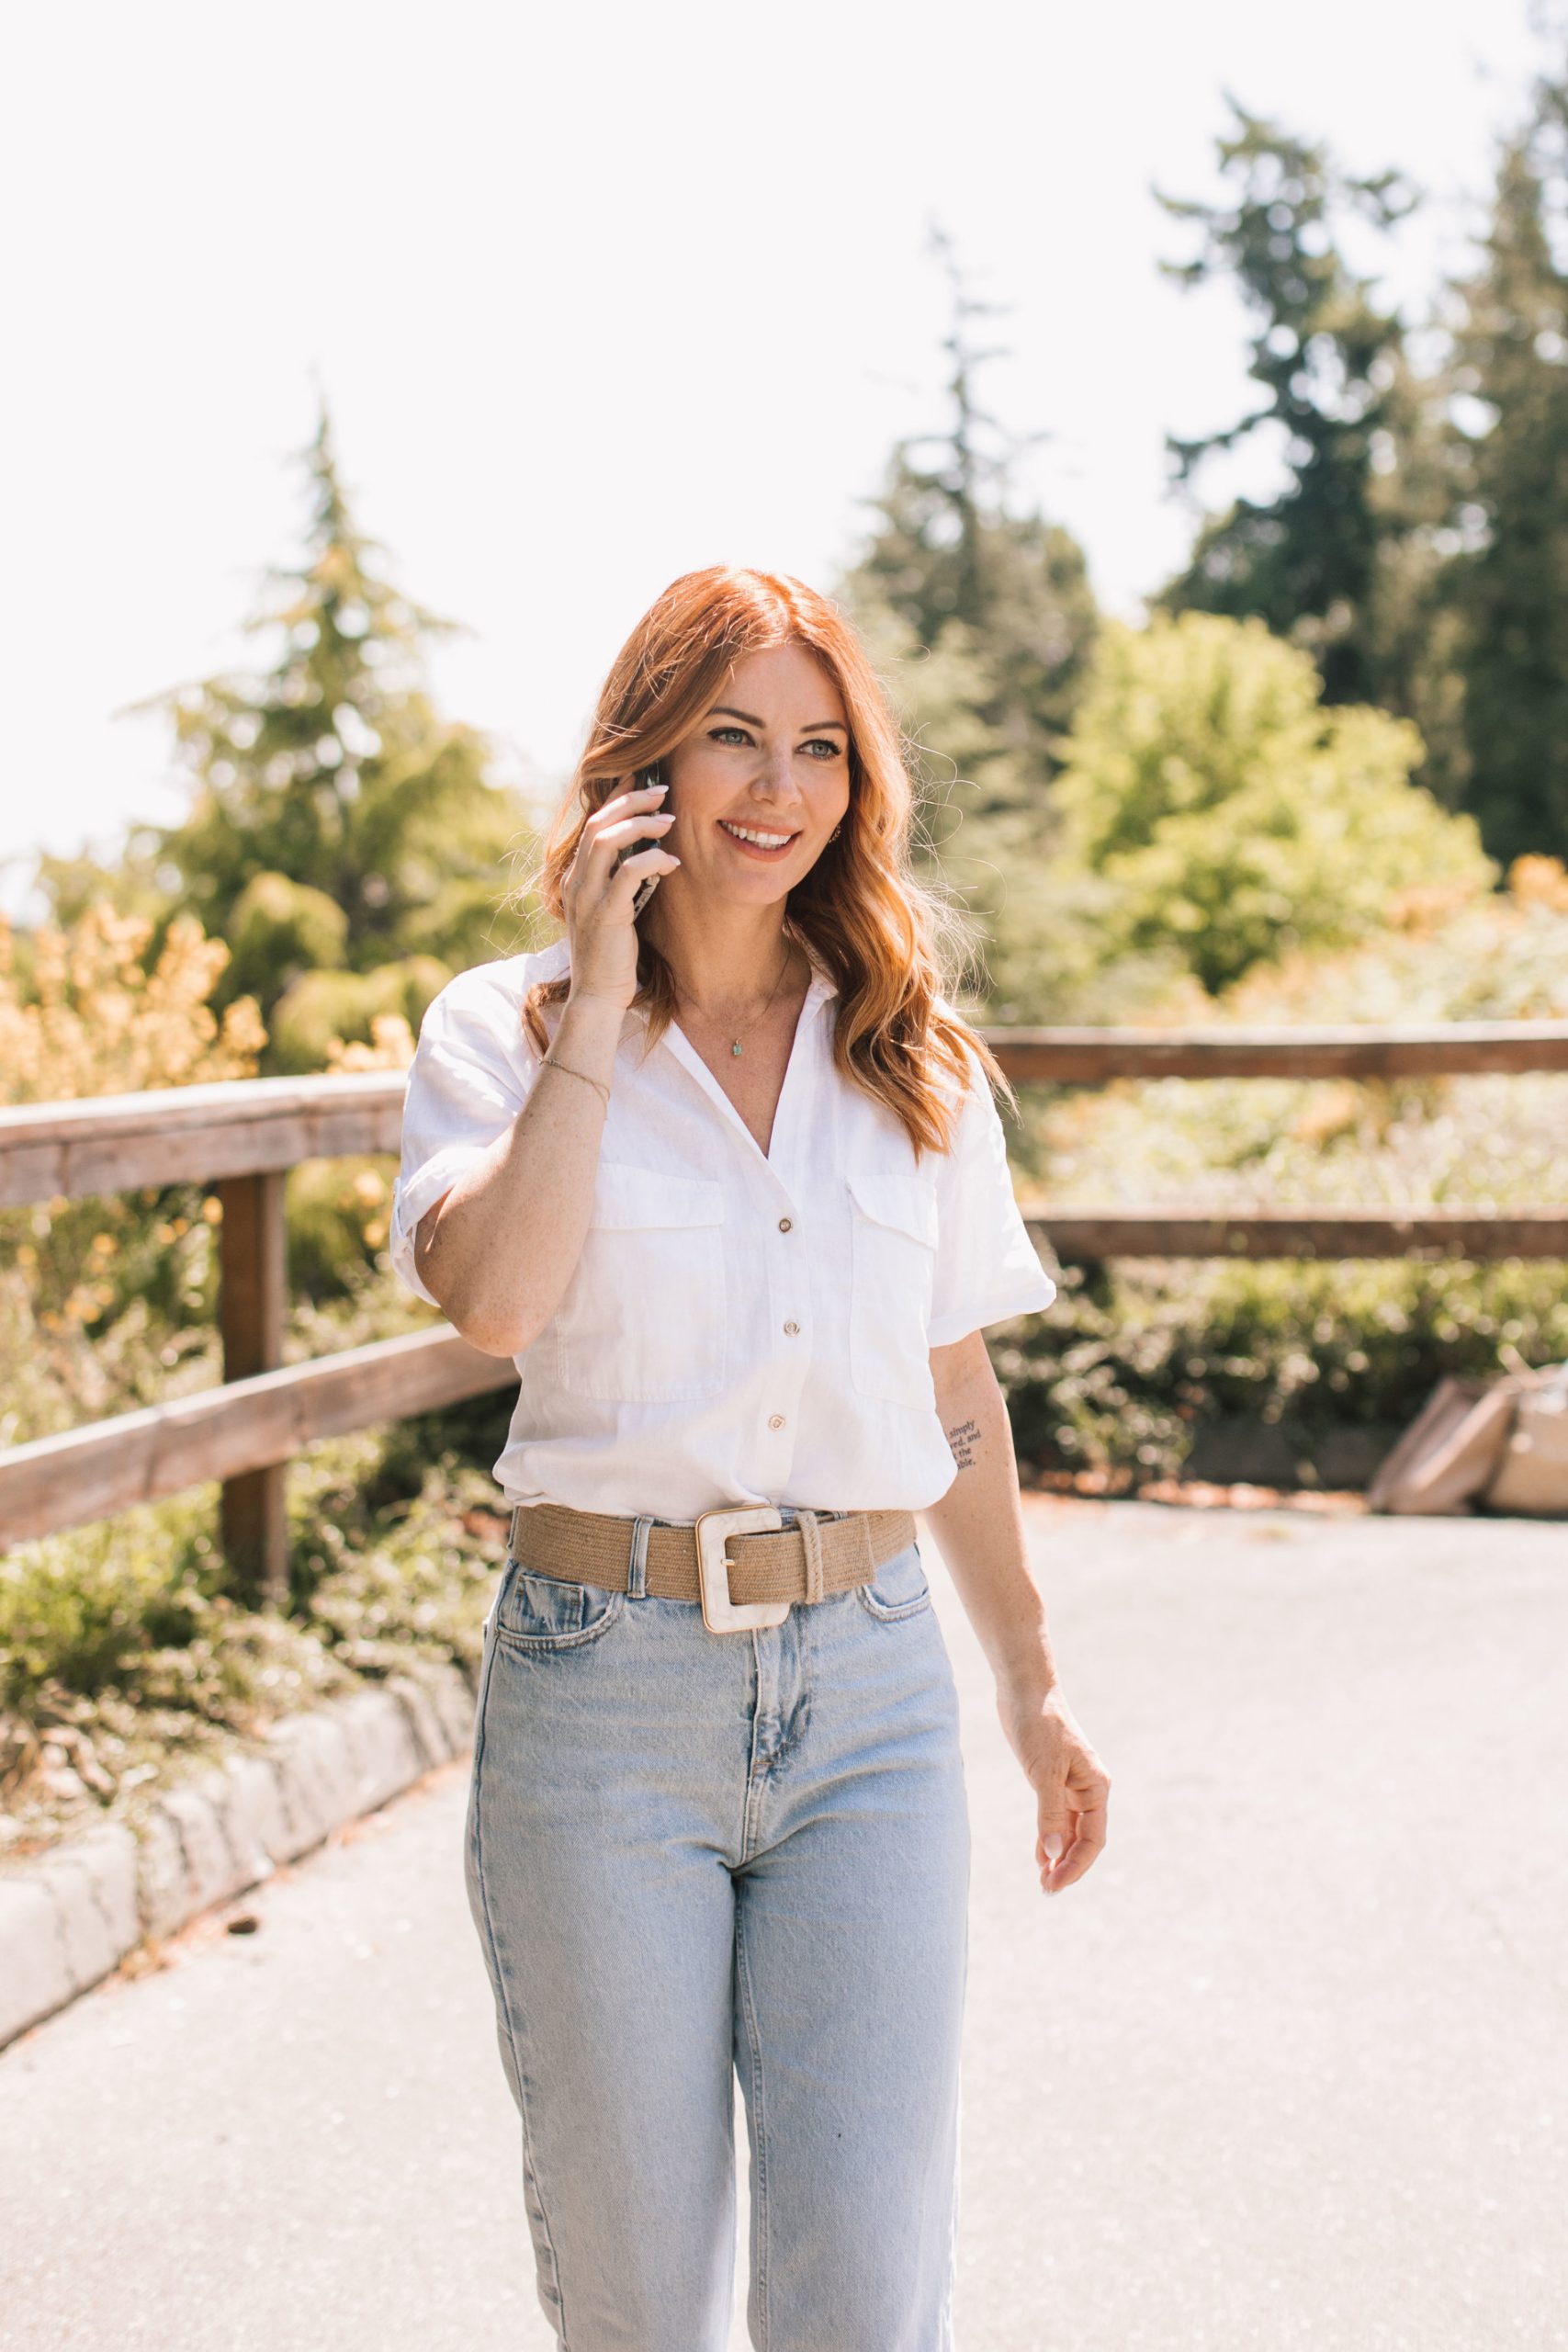 A woman in white shirt holding a cell phone.